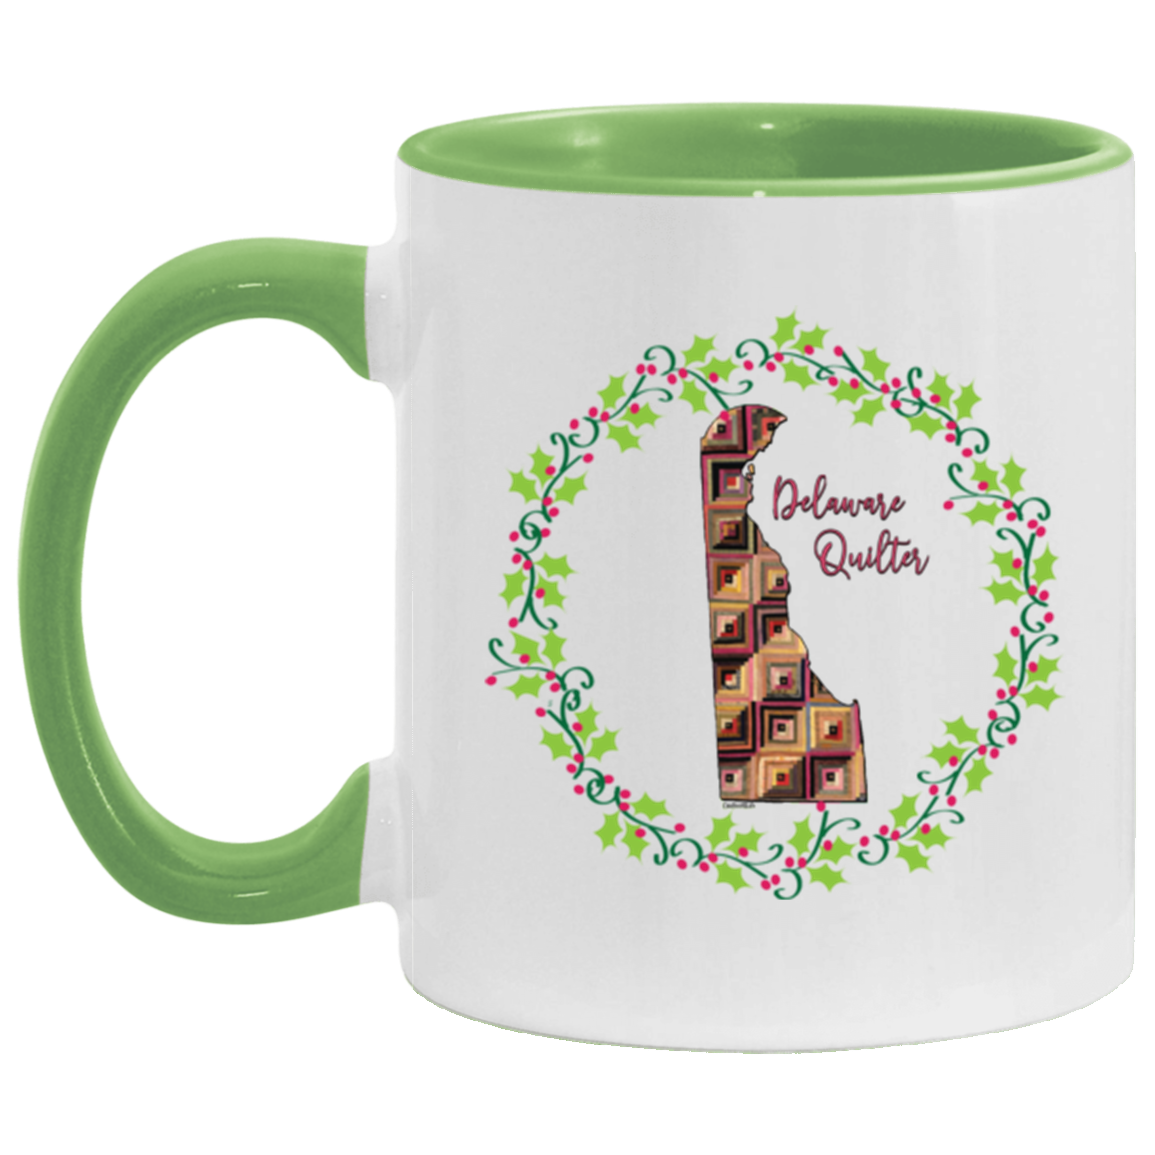 Delaware Quilter Christmas Accent Mug